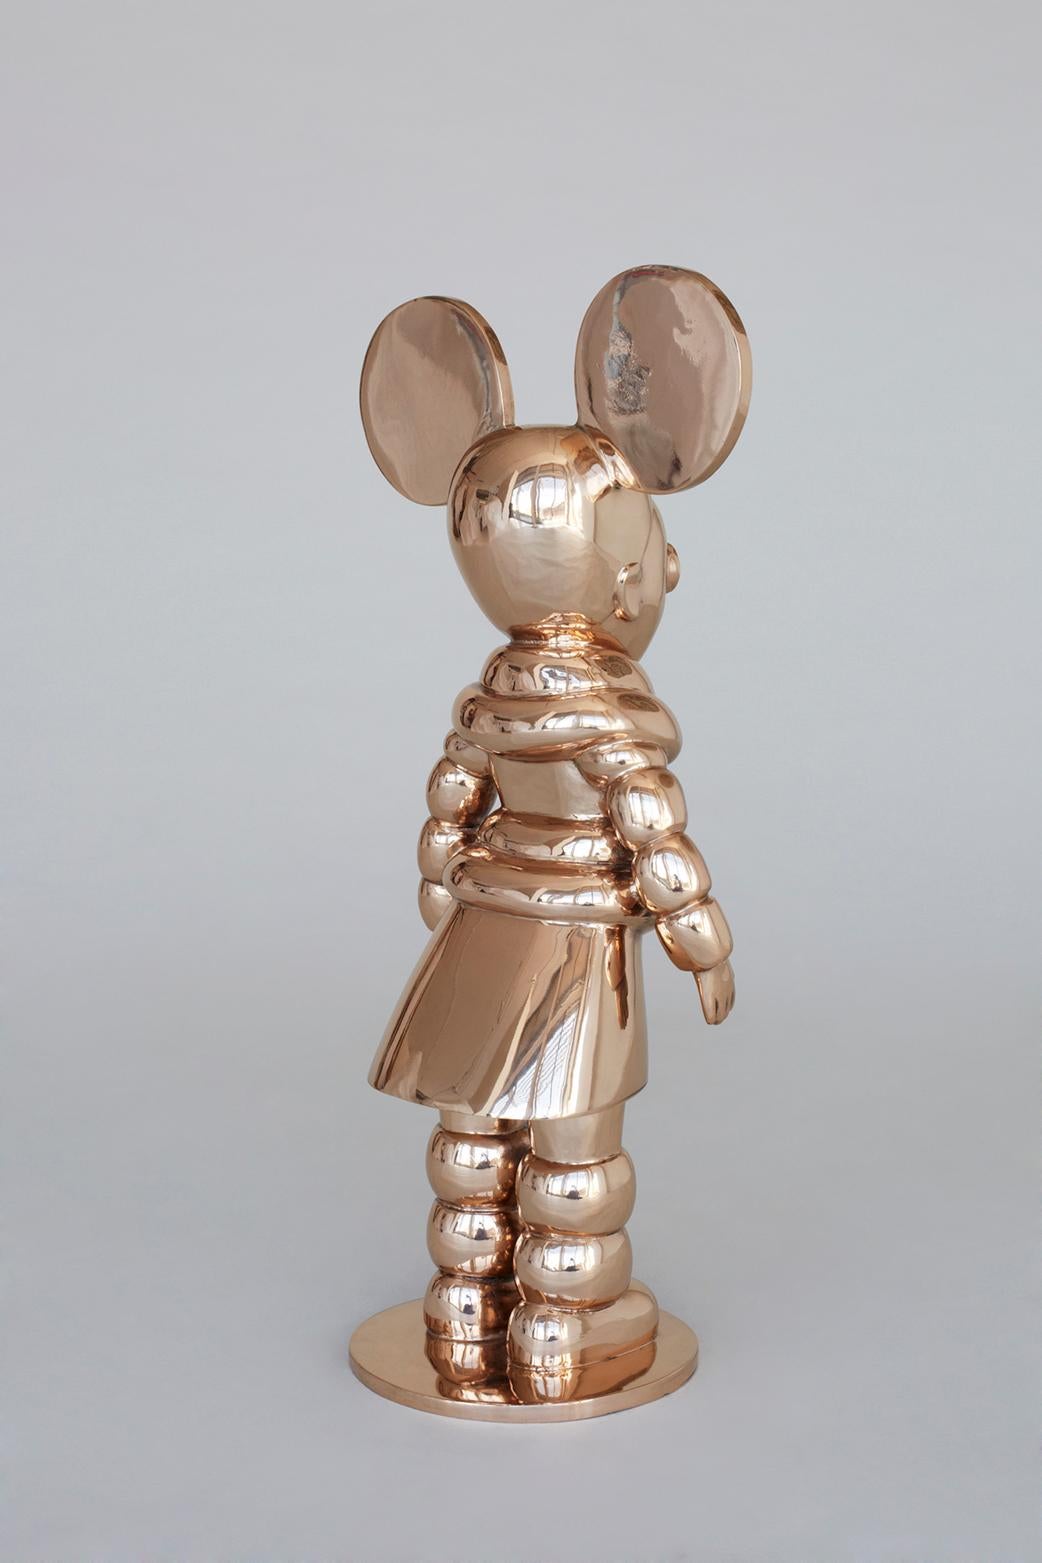 A special edition of Justine Mahoney’s Mighty Ndebele sculpture, finished entirely in polished bronze. Mahoney's bronze figures represent the fears, nightmares, dreams and aspirations of children. These are based on stories told to their creator by